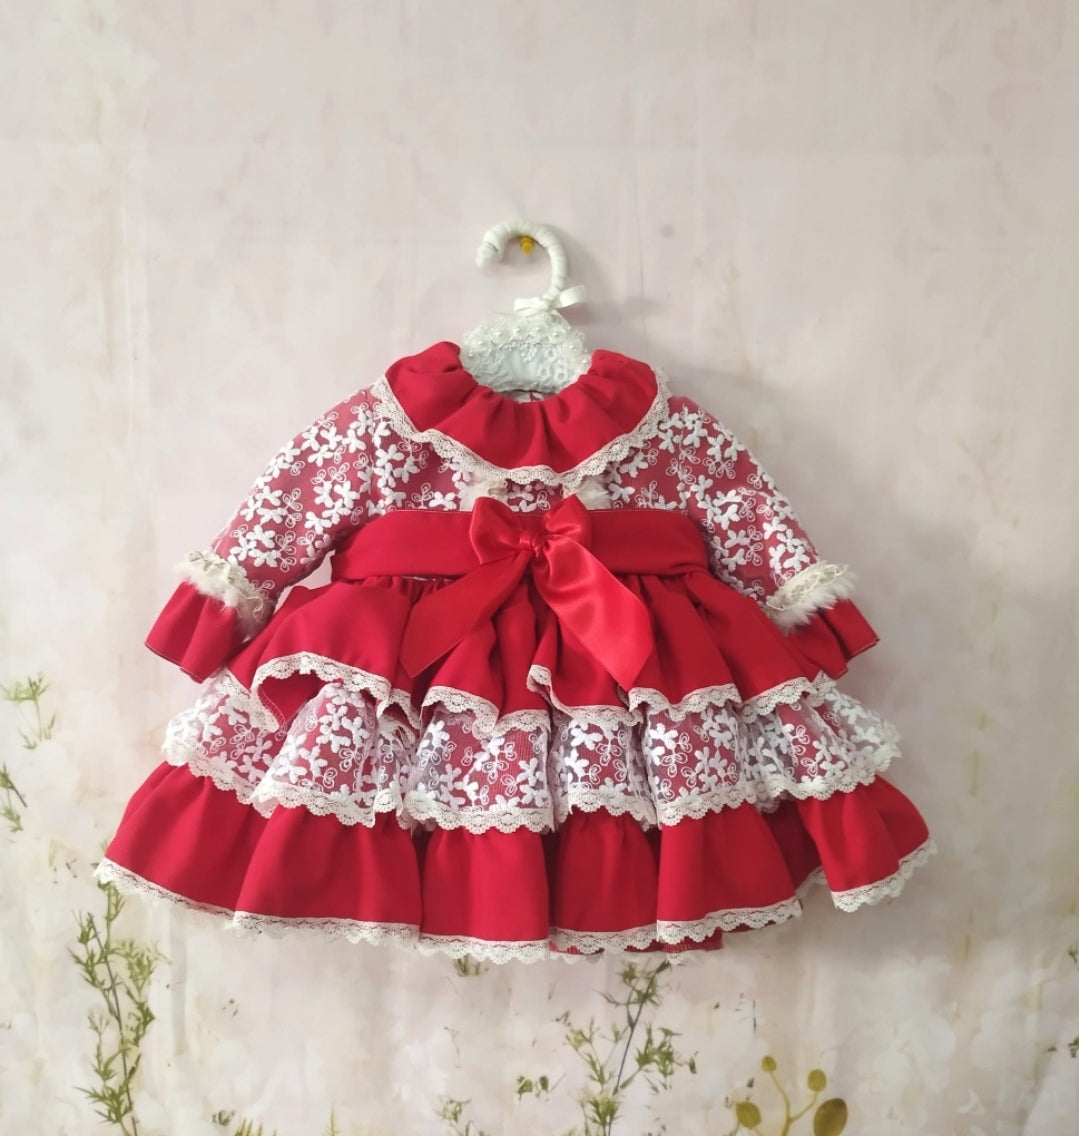 Sonata Spanish Girls Red & White Lace Puffball Dress - 12 months - IN STOCK NOW